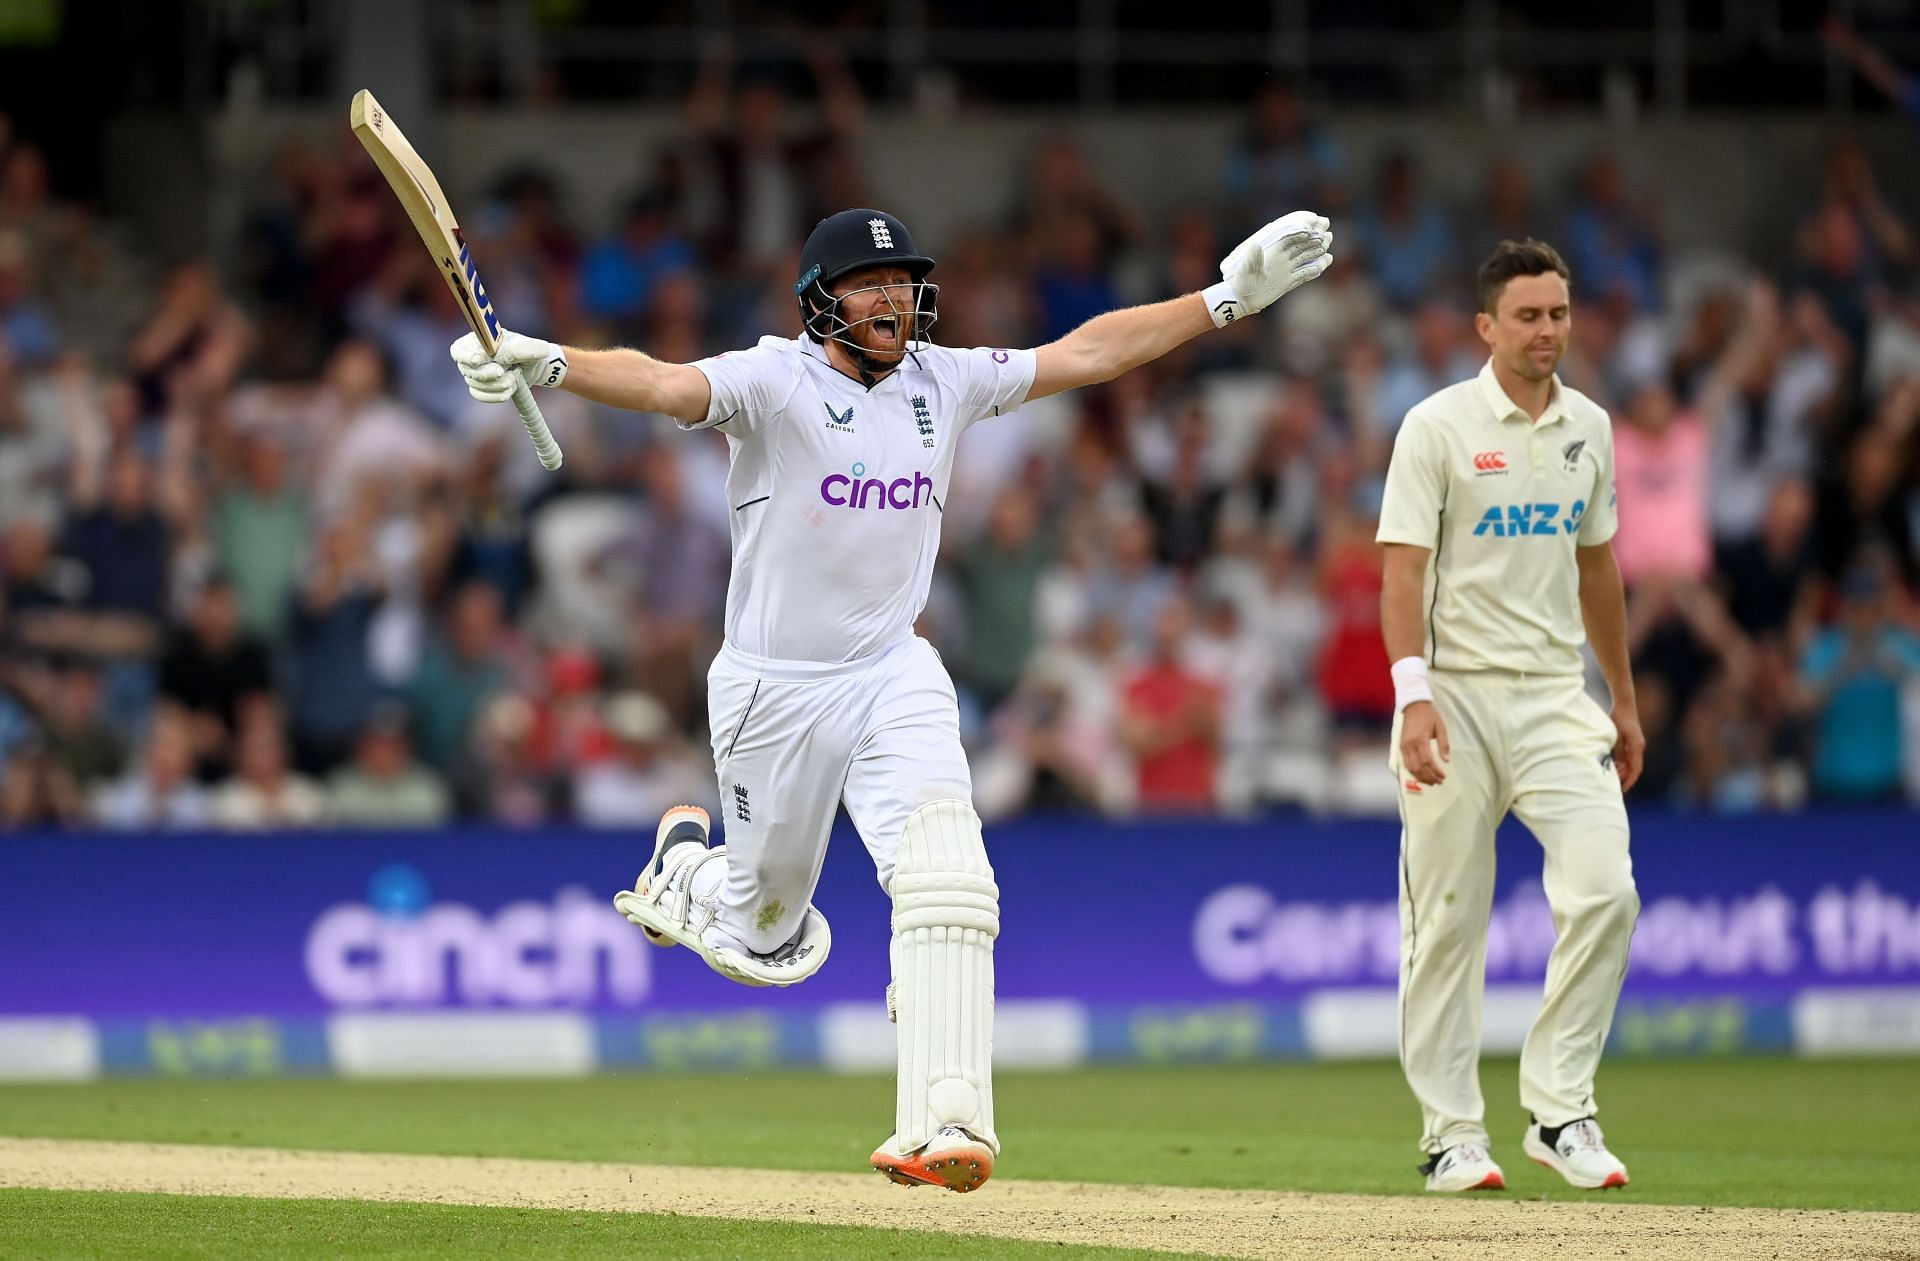 Jonny Bairstow was unstoppable in the last English summer